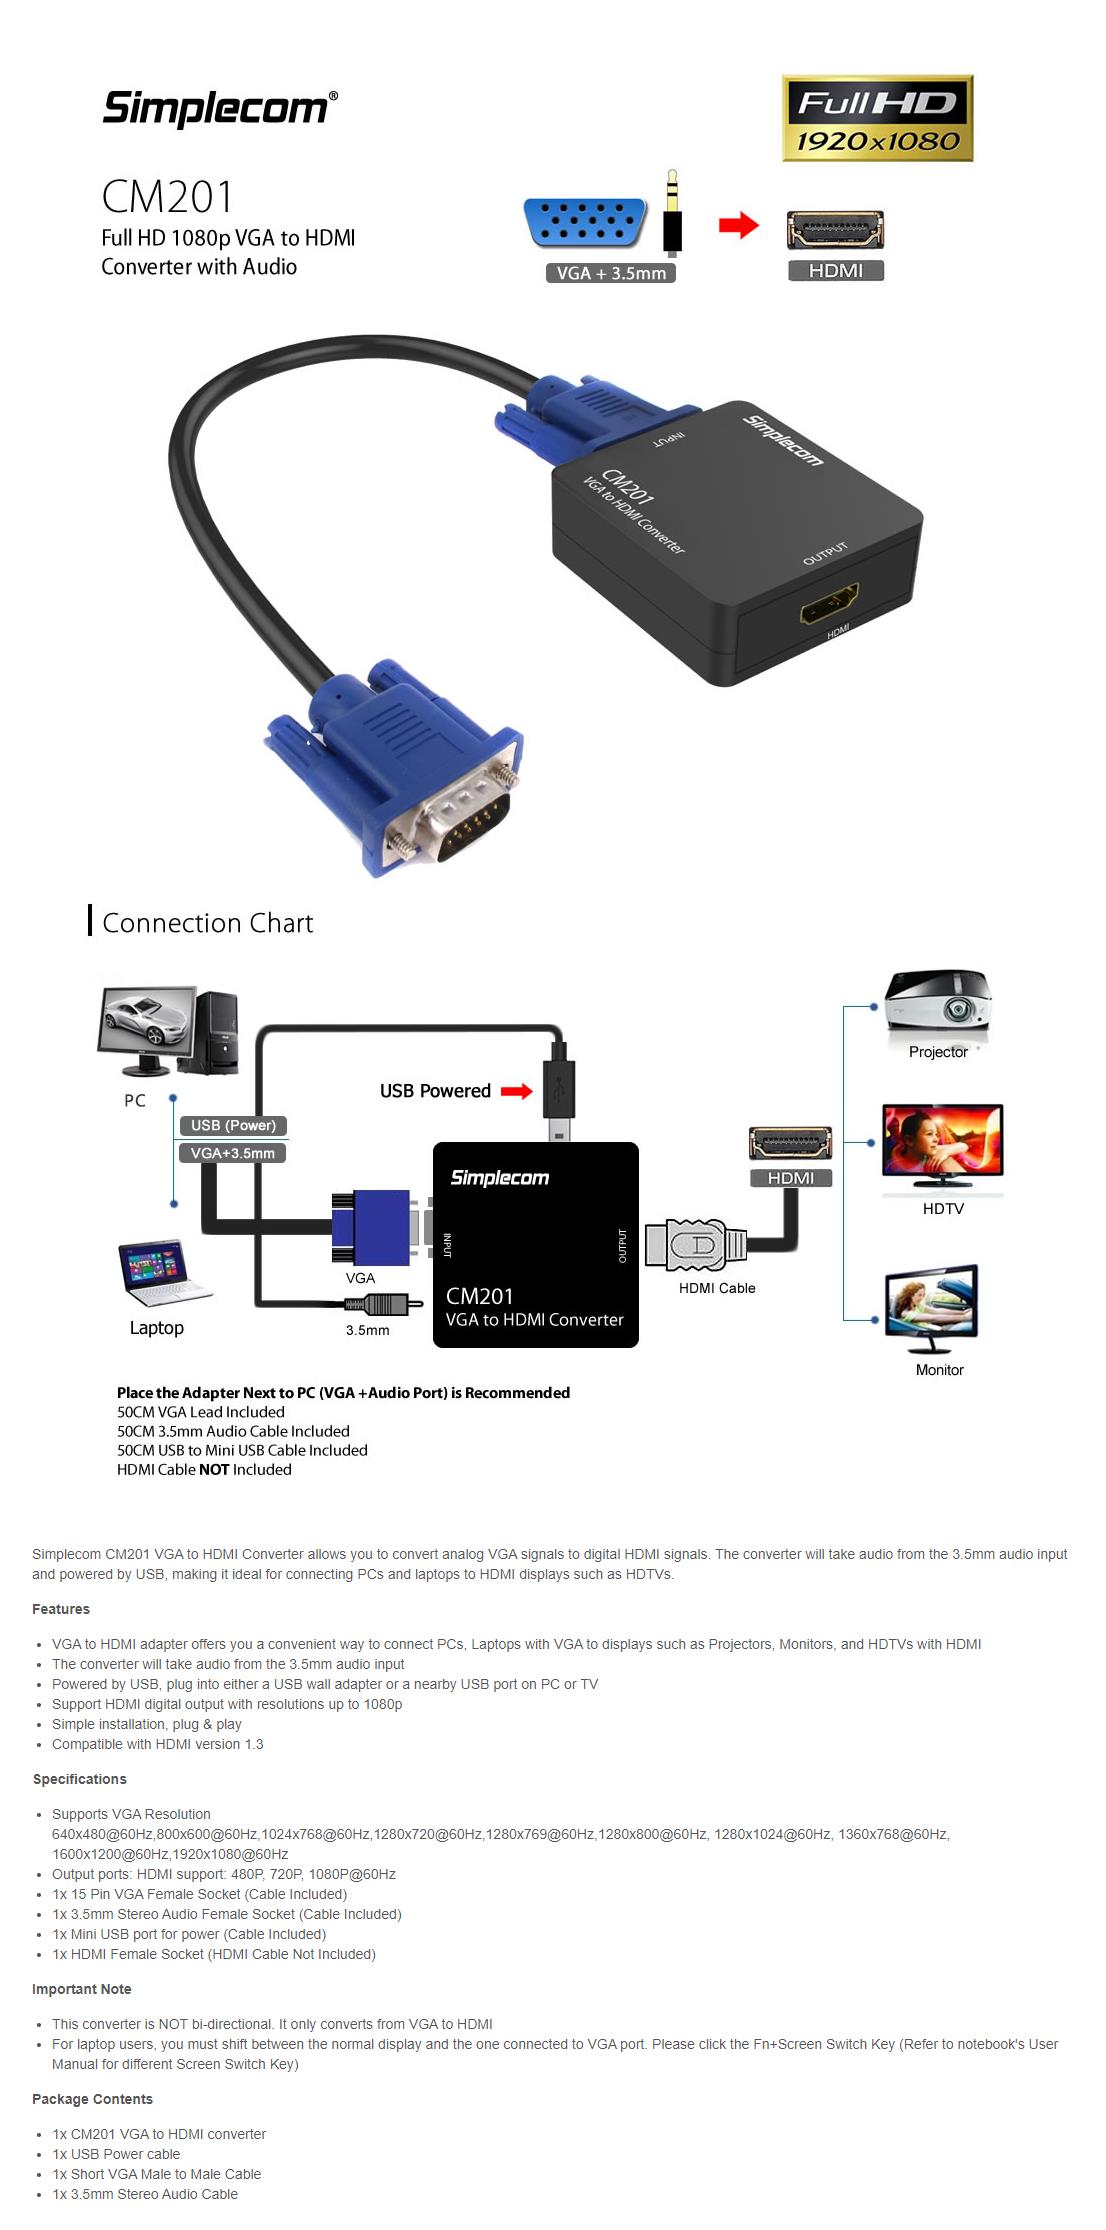 A large marketing image providing additional information about the product Simplecom CM201 Full HD 1080p VGA to HDMI Converter with Audio - Additional alt info not provided